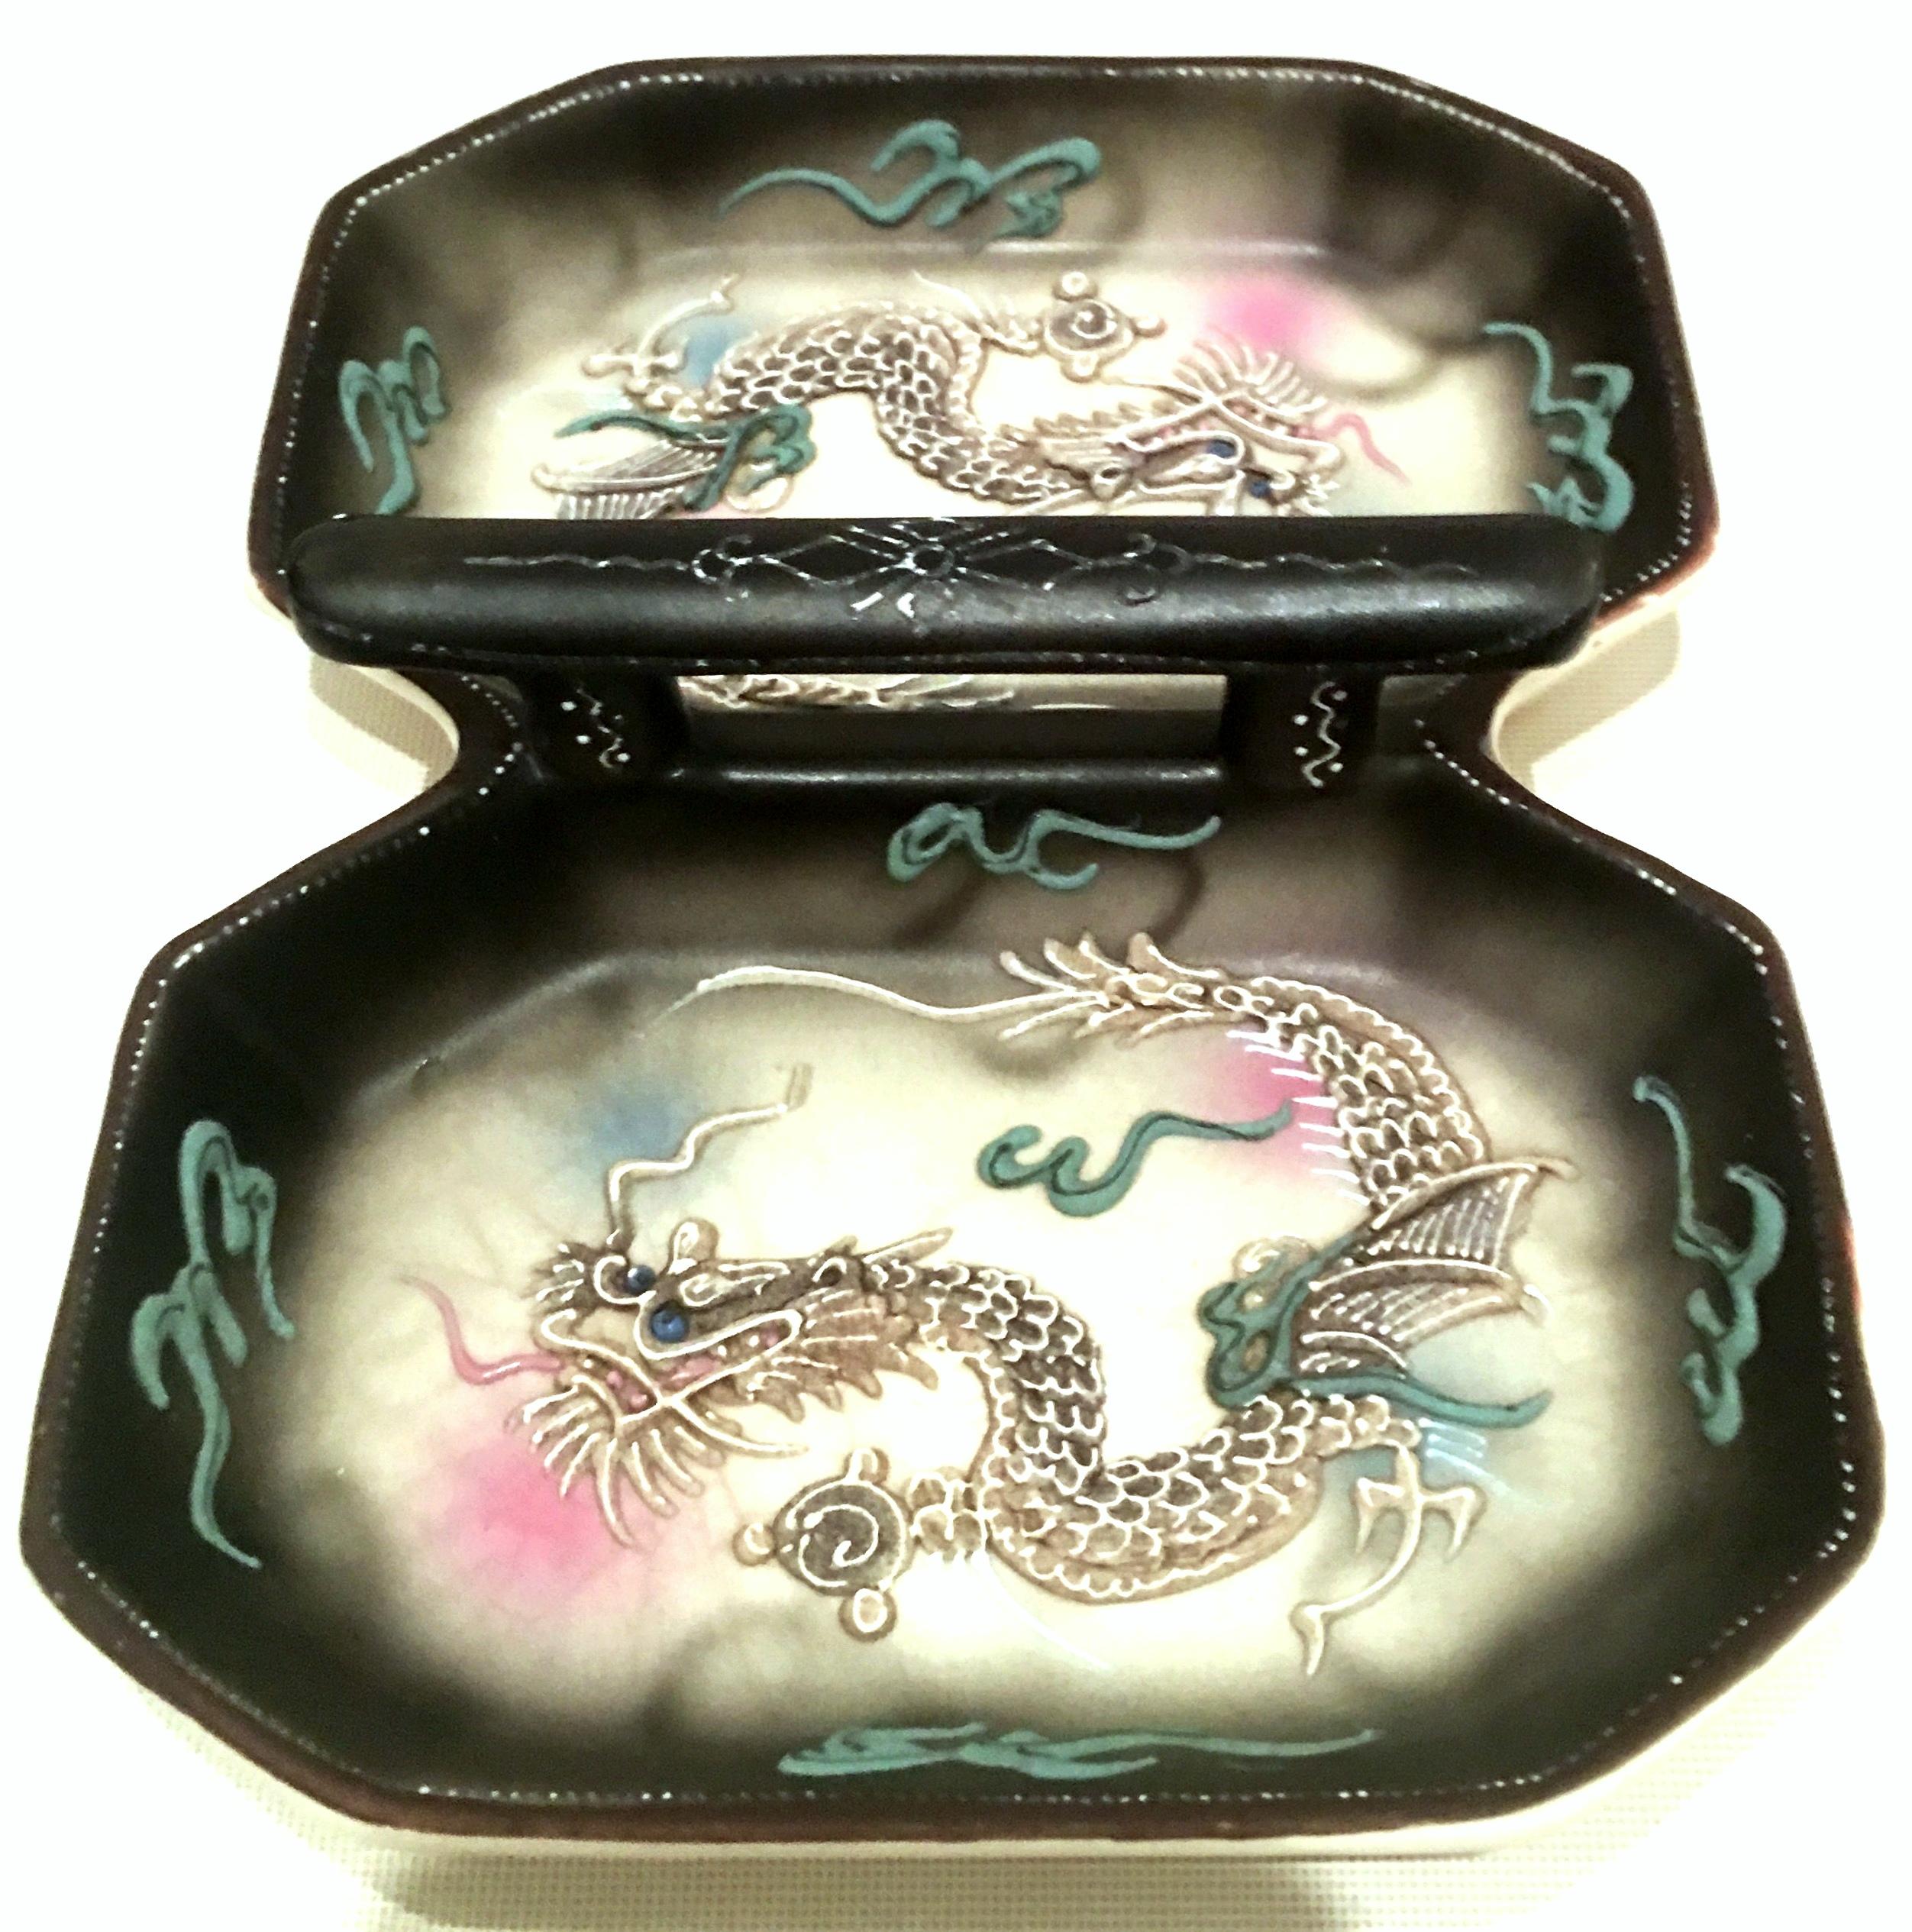 Mid-20th century Japanese Porcelain Moriage Dragon ware handled divided dish. Signed on the underside, Made In Japan.